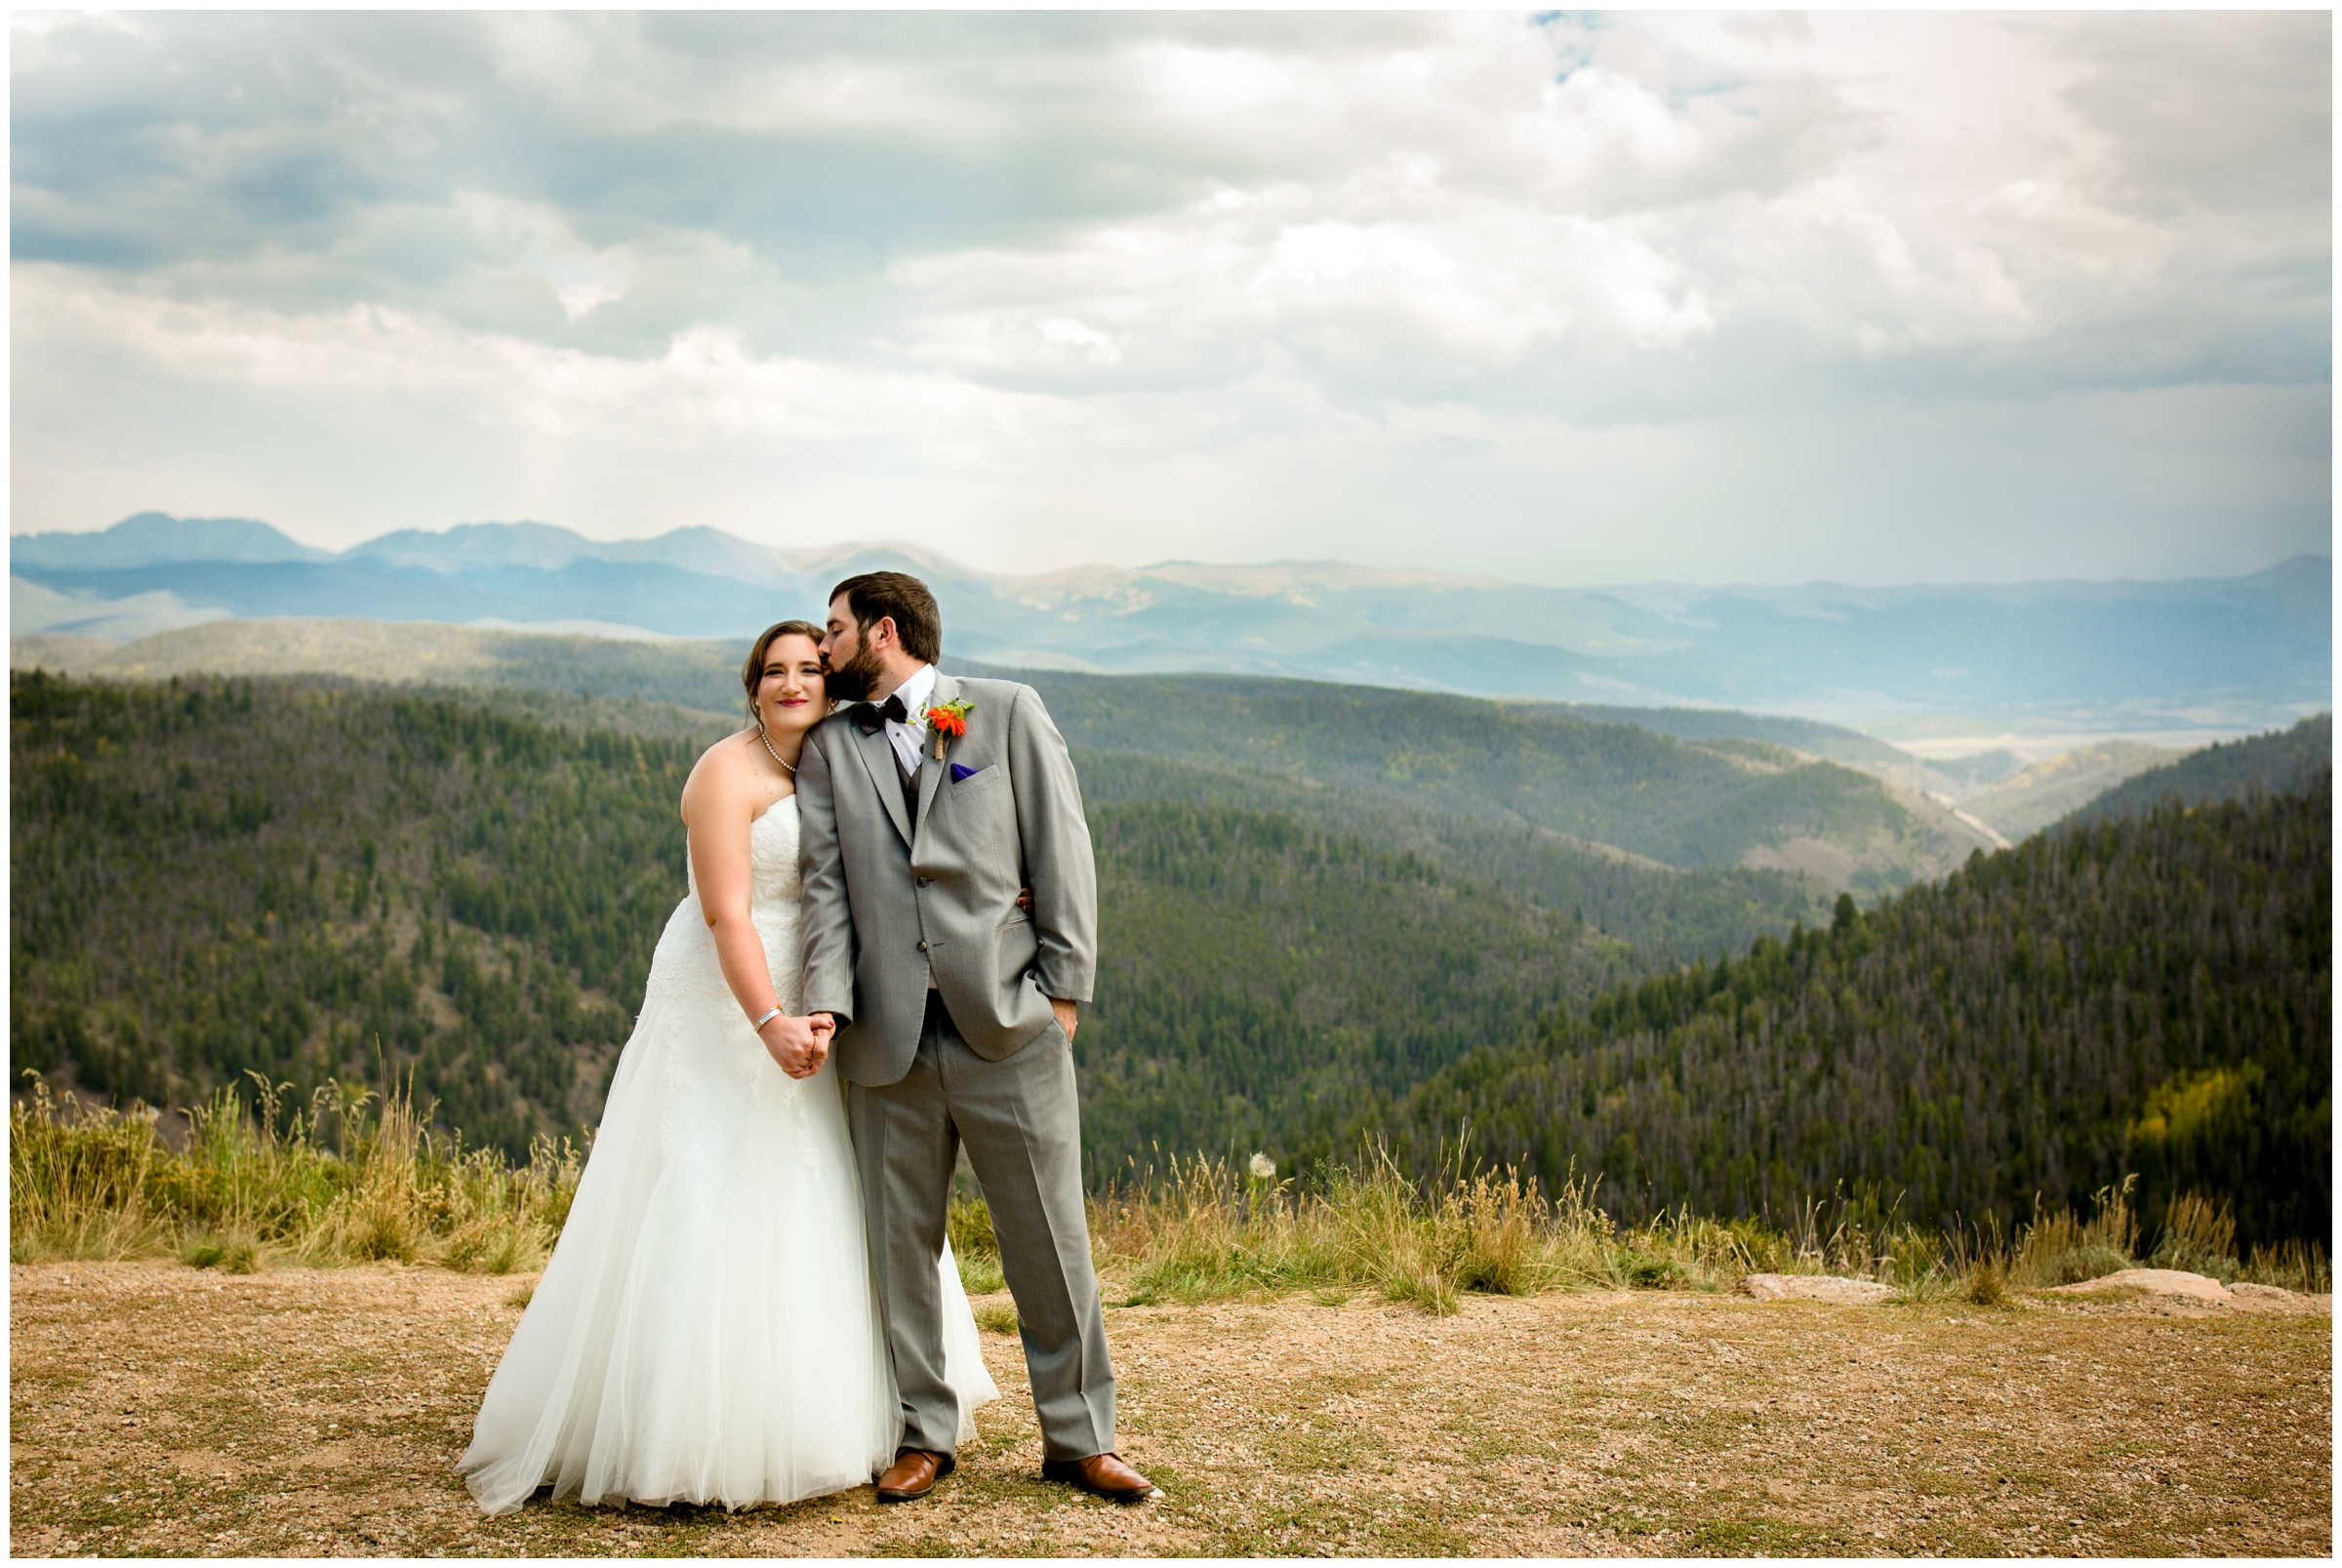 Granby Ranch wedding pictures with mountains in background 